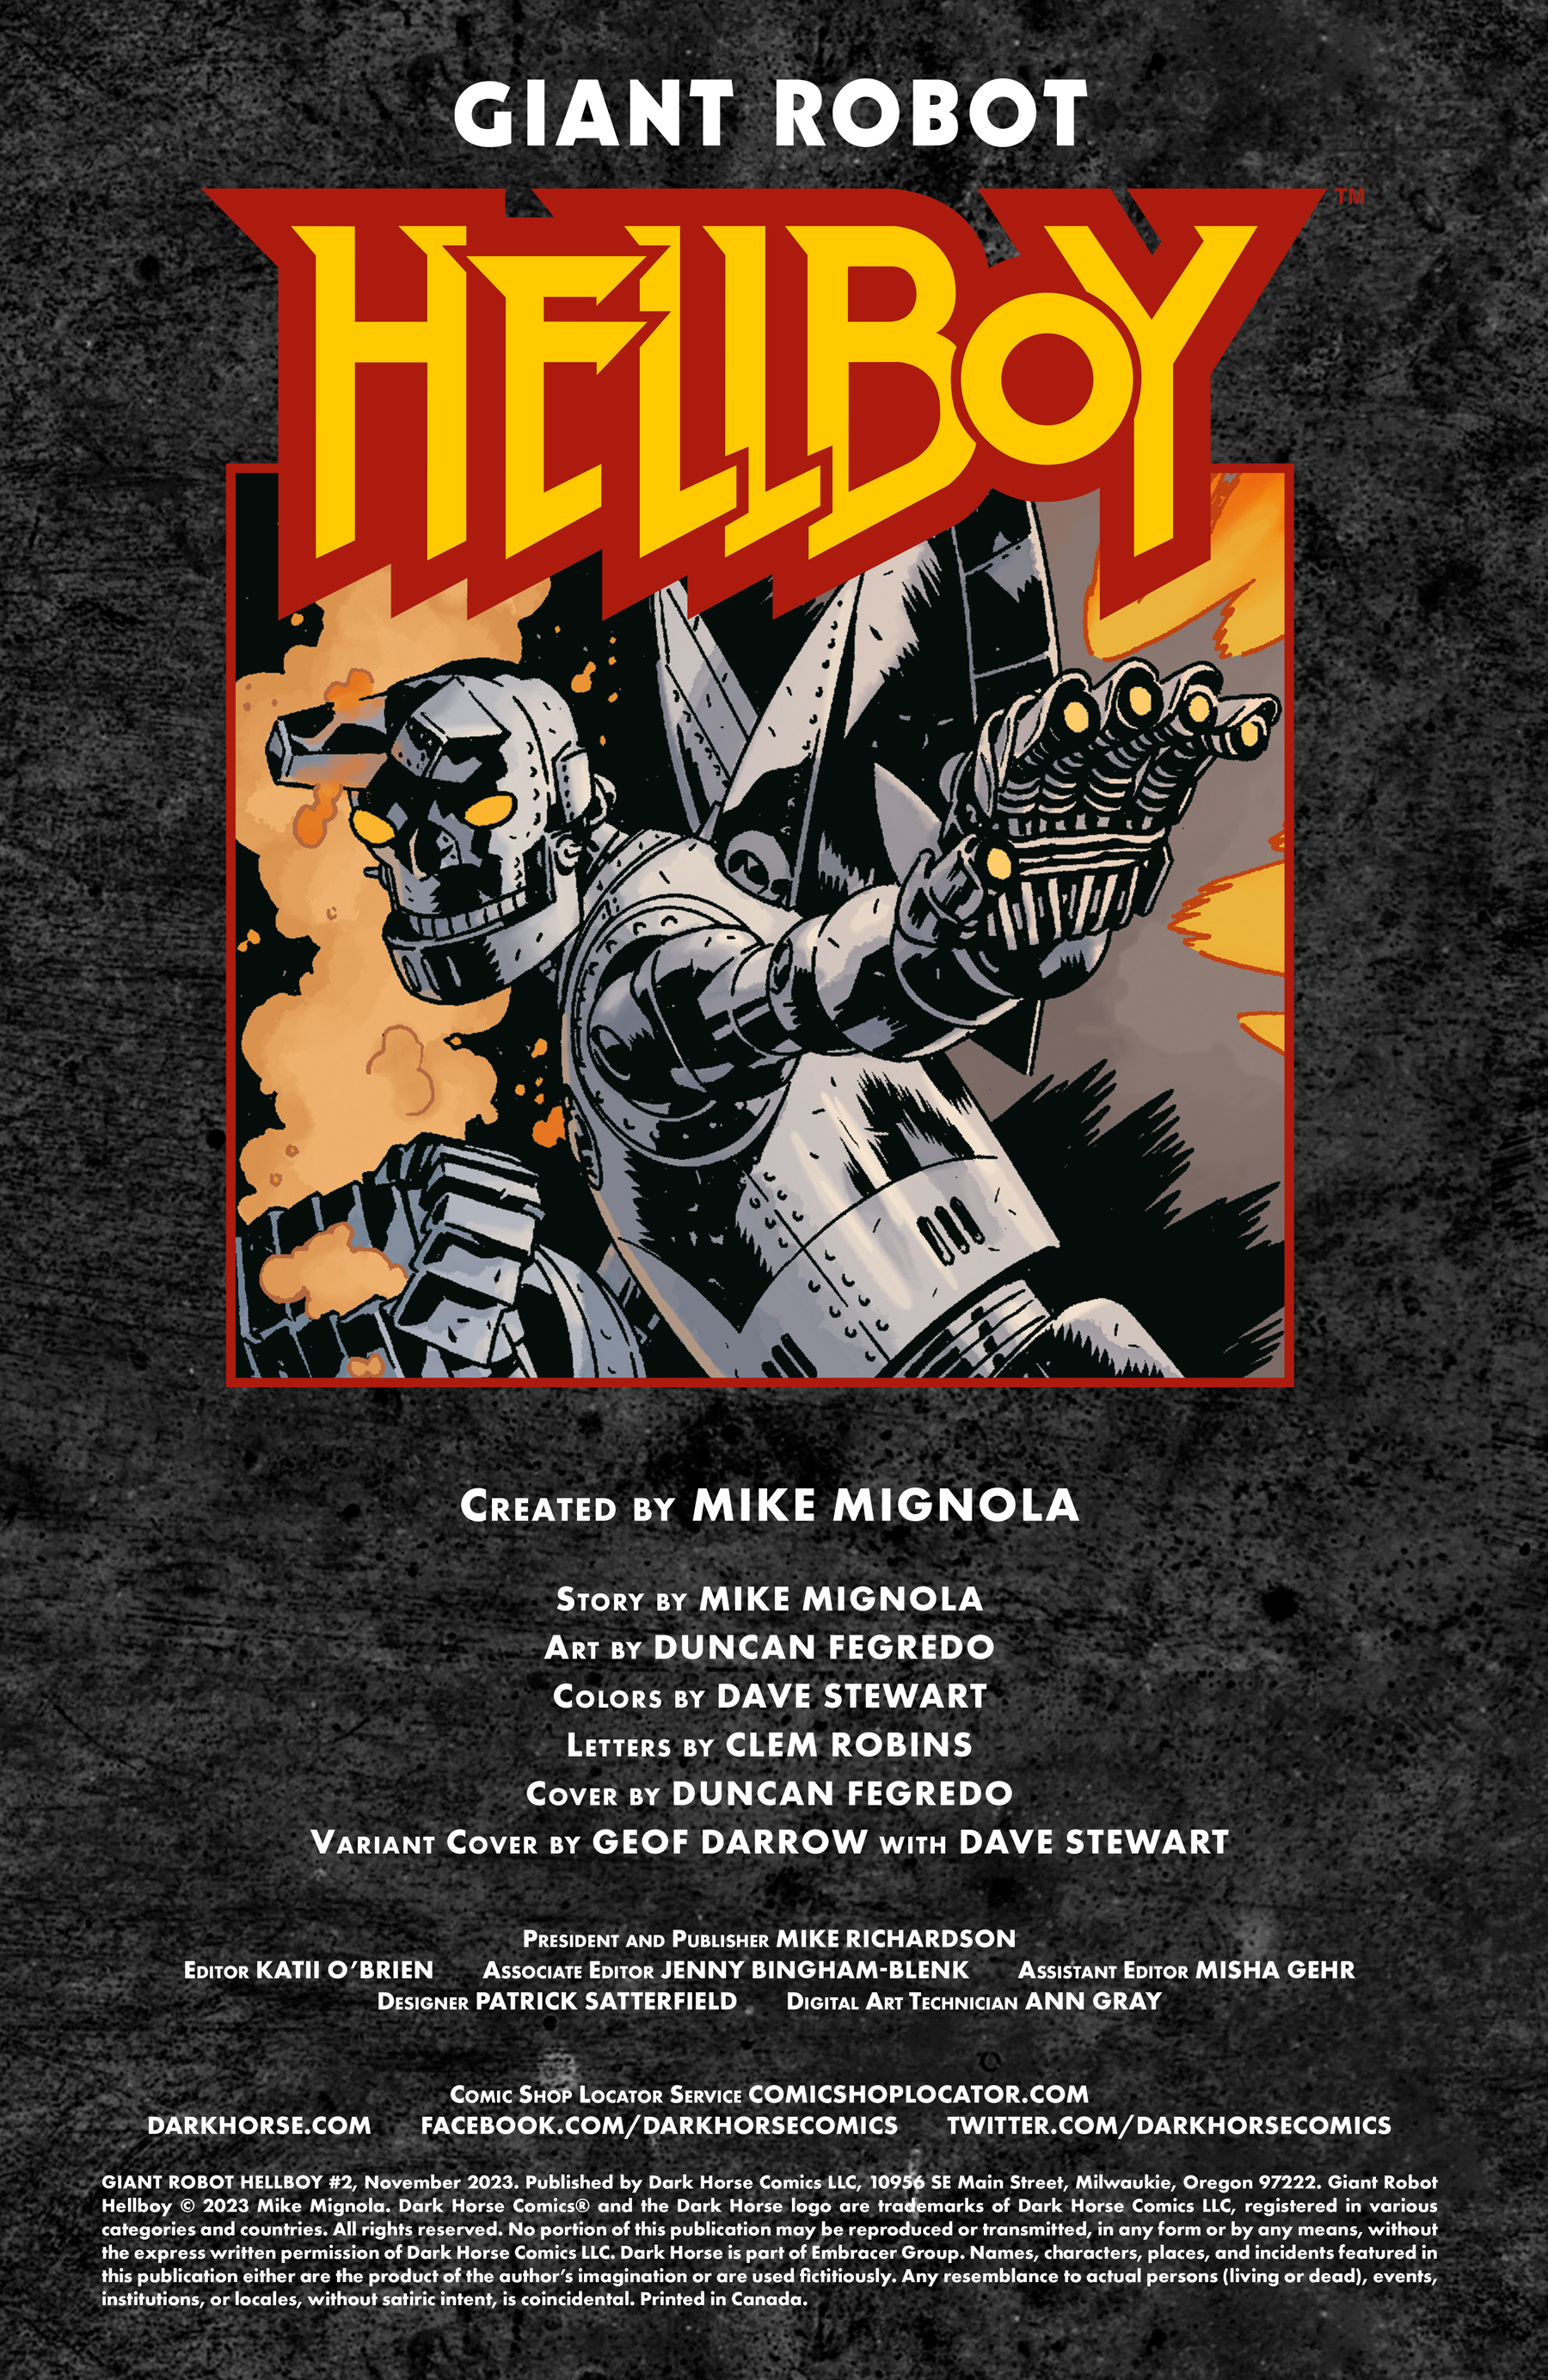 Read online Giant Robot Hellboy comic -  Issue #2 - 2